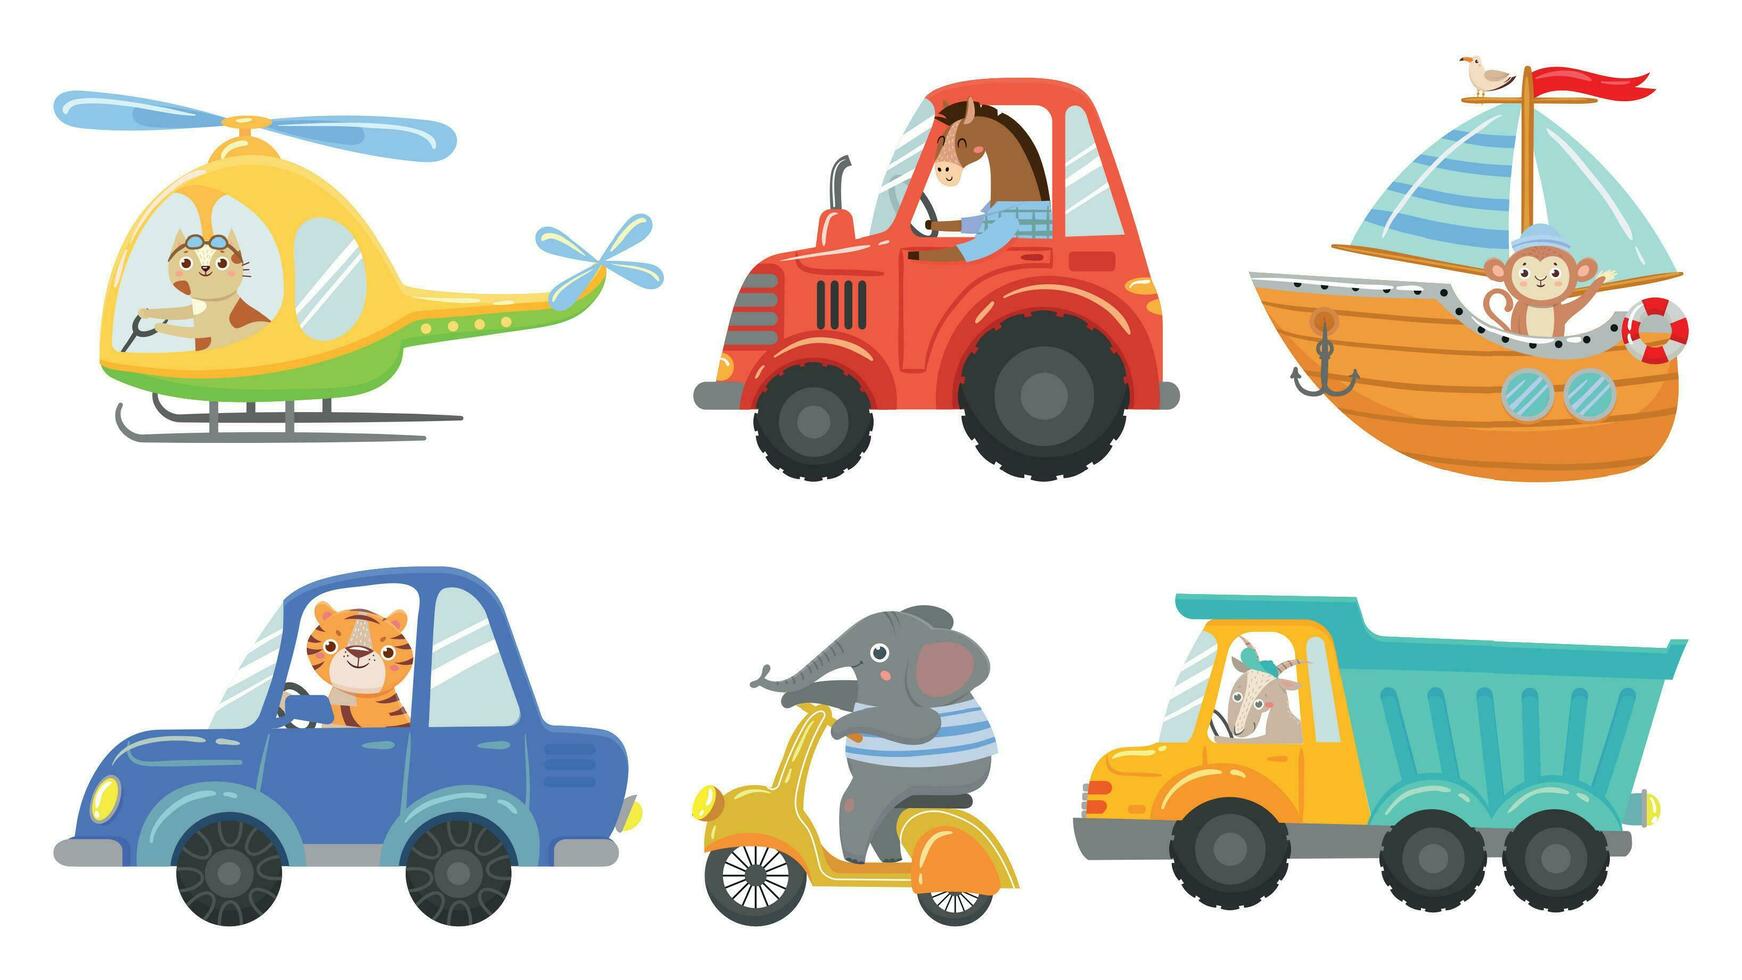 Cute animal drivers. Animal driving car, tractor and truck. Toy helicopter, sailboat and urban scooter cartoon vector illustration set